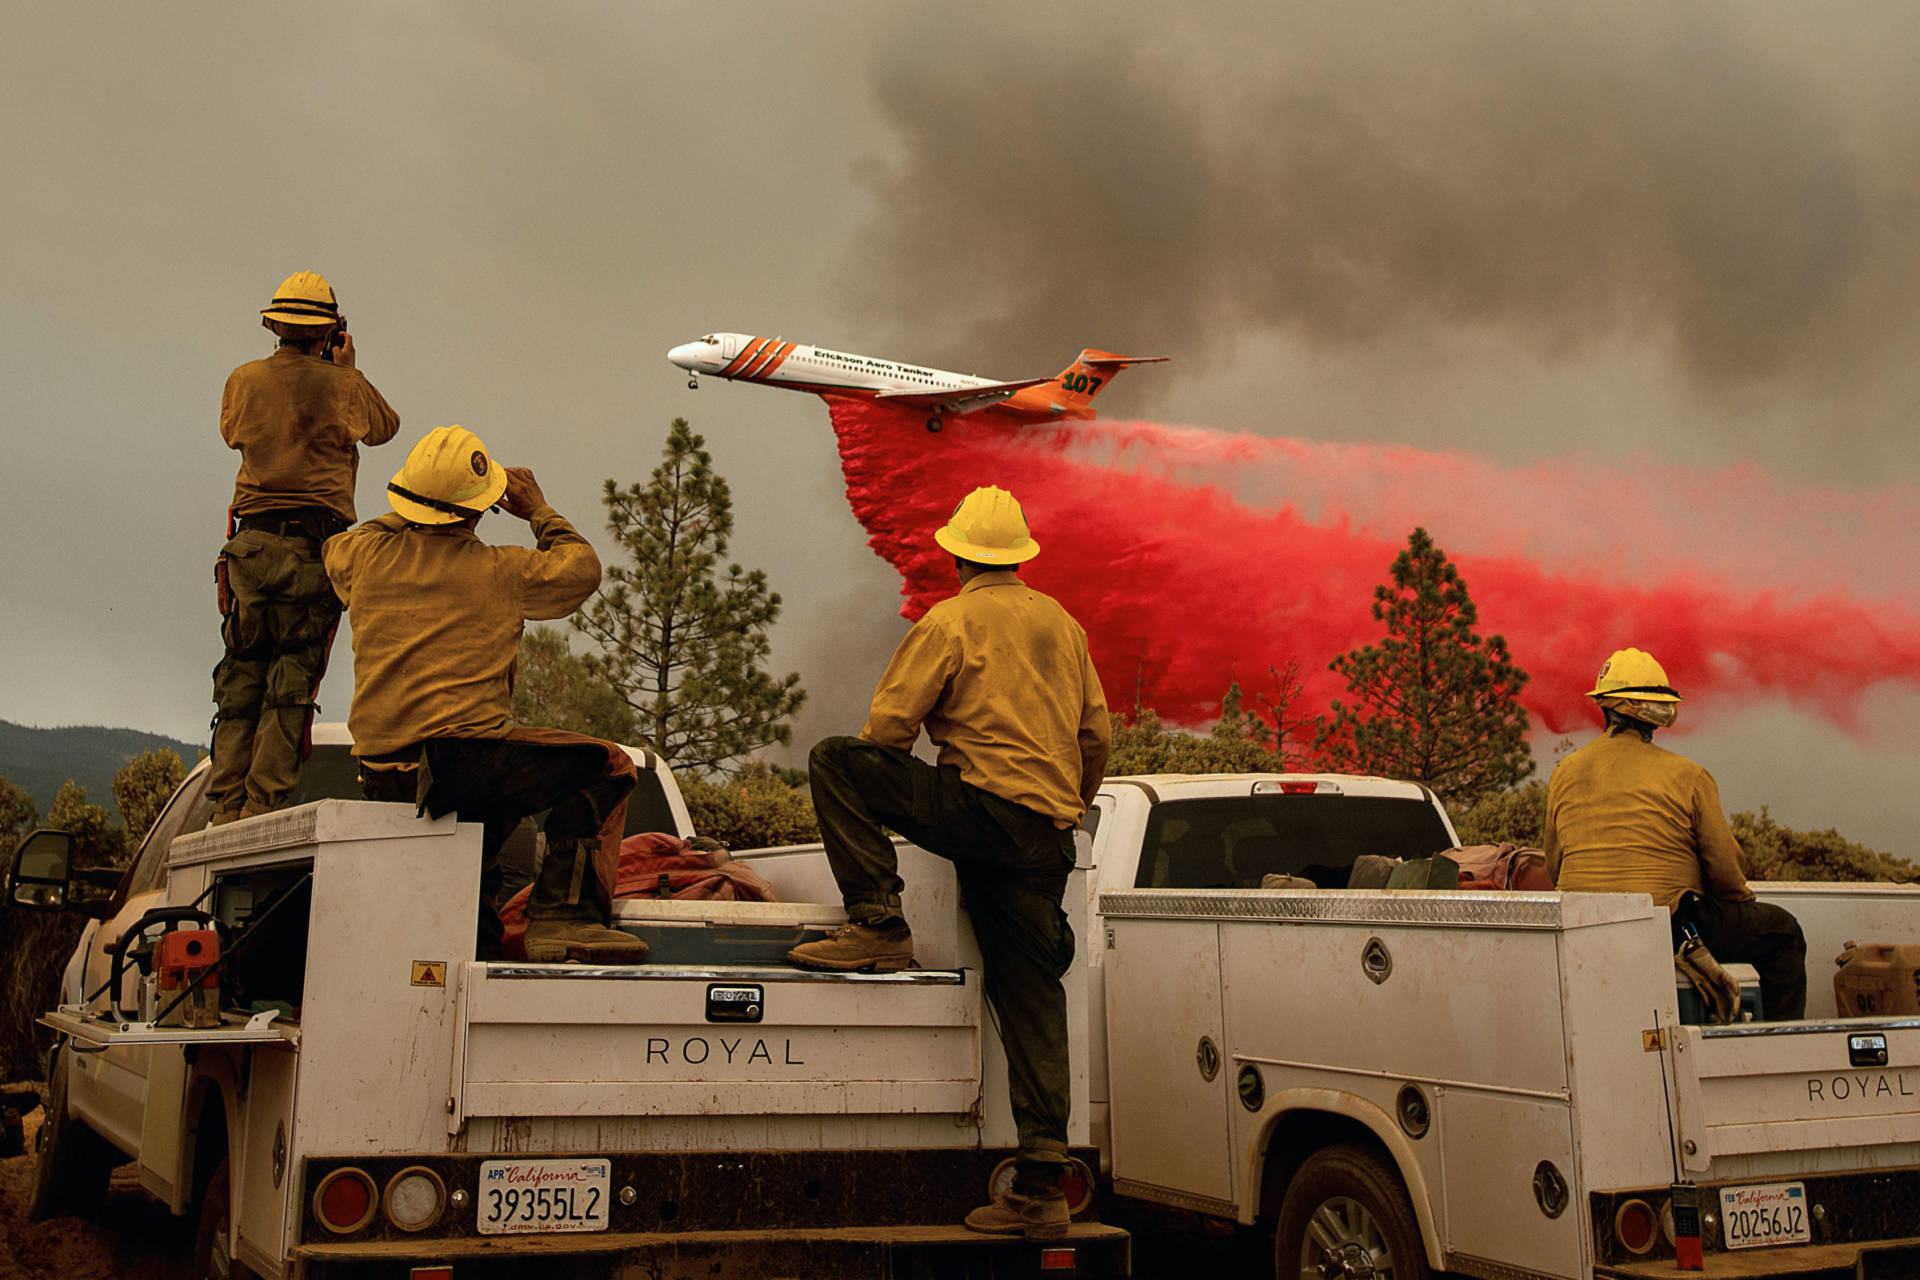 Firefighters watched Saturday (July 21) as an air tanker dropped retardant while battling the Ferguson Fire in the Stanislaus National Forest, near Yosemite National Park. Noah Berger/AFP-Getty Images